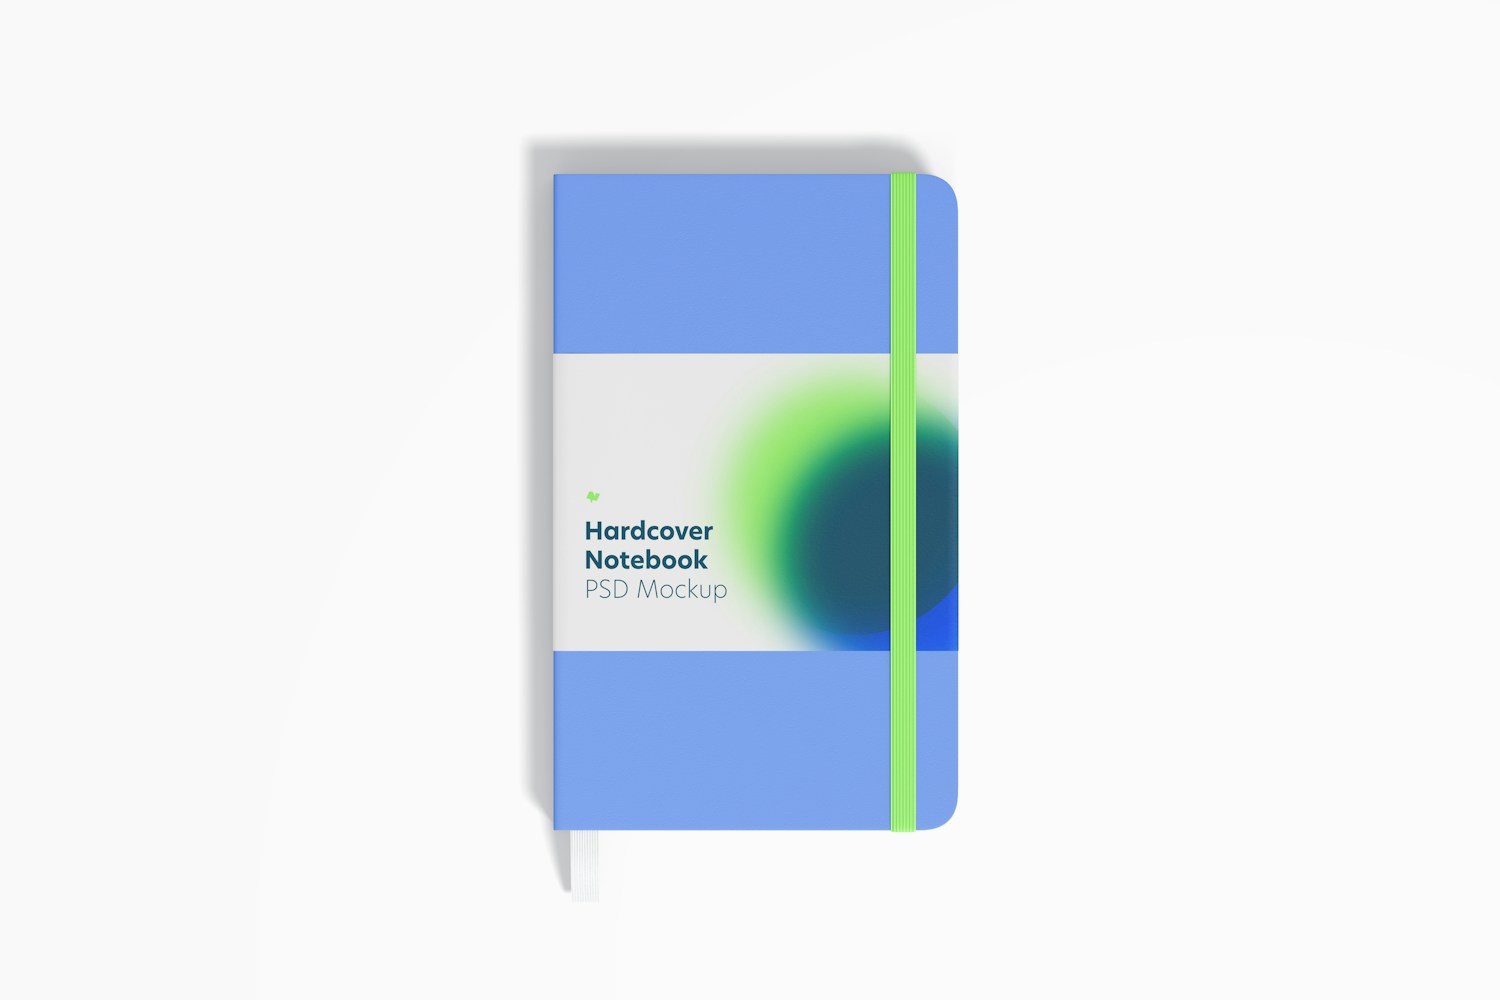 Hardcover Notebooks with Elastic Band Mockup, Front View